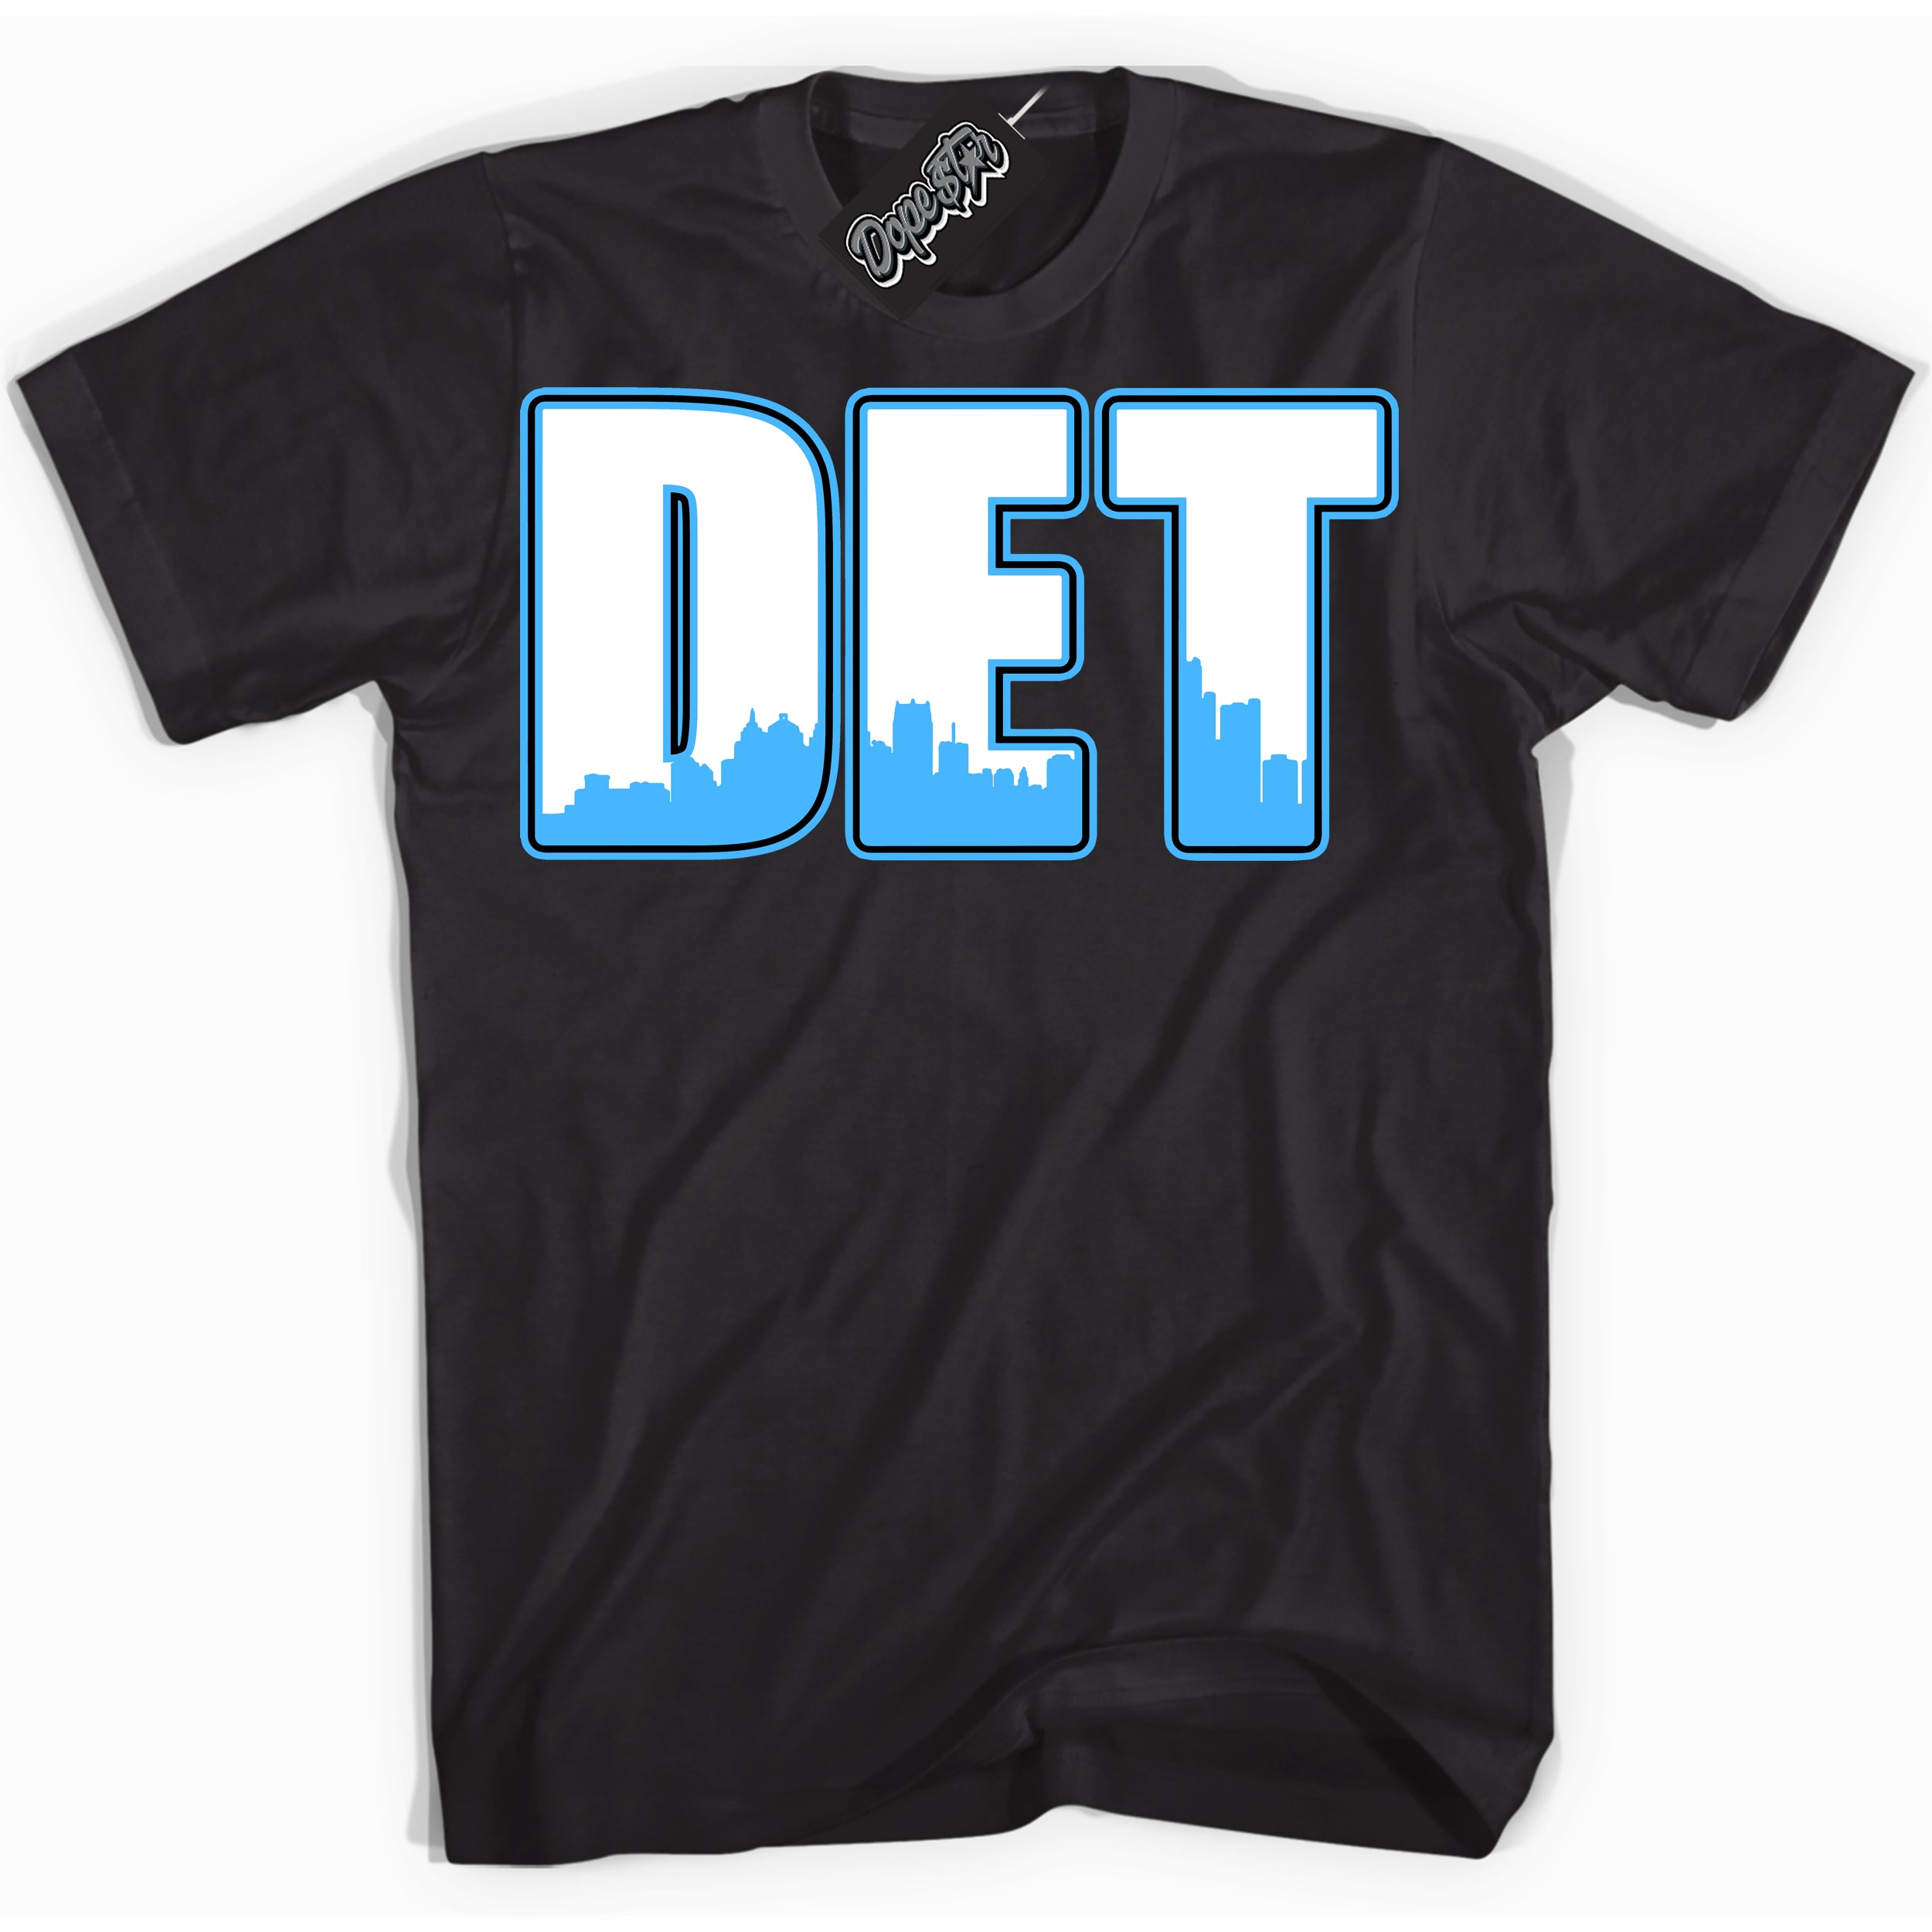 Cool Black graphic tee with “ Detroit ” design, that perfectly matches Powder Blue 9s sneakers 